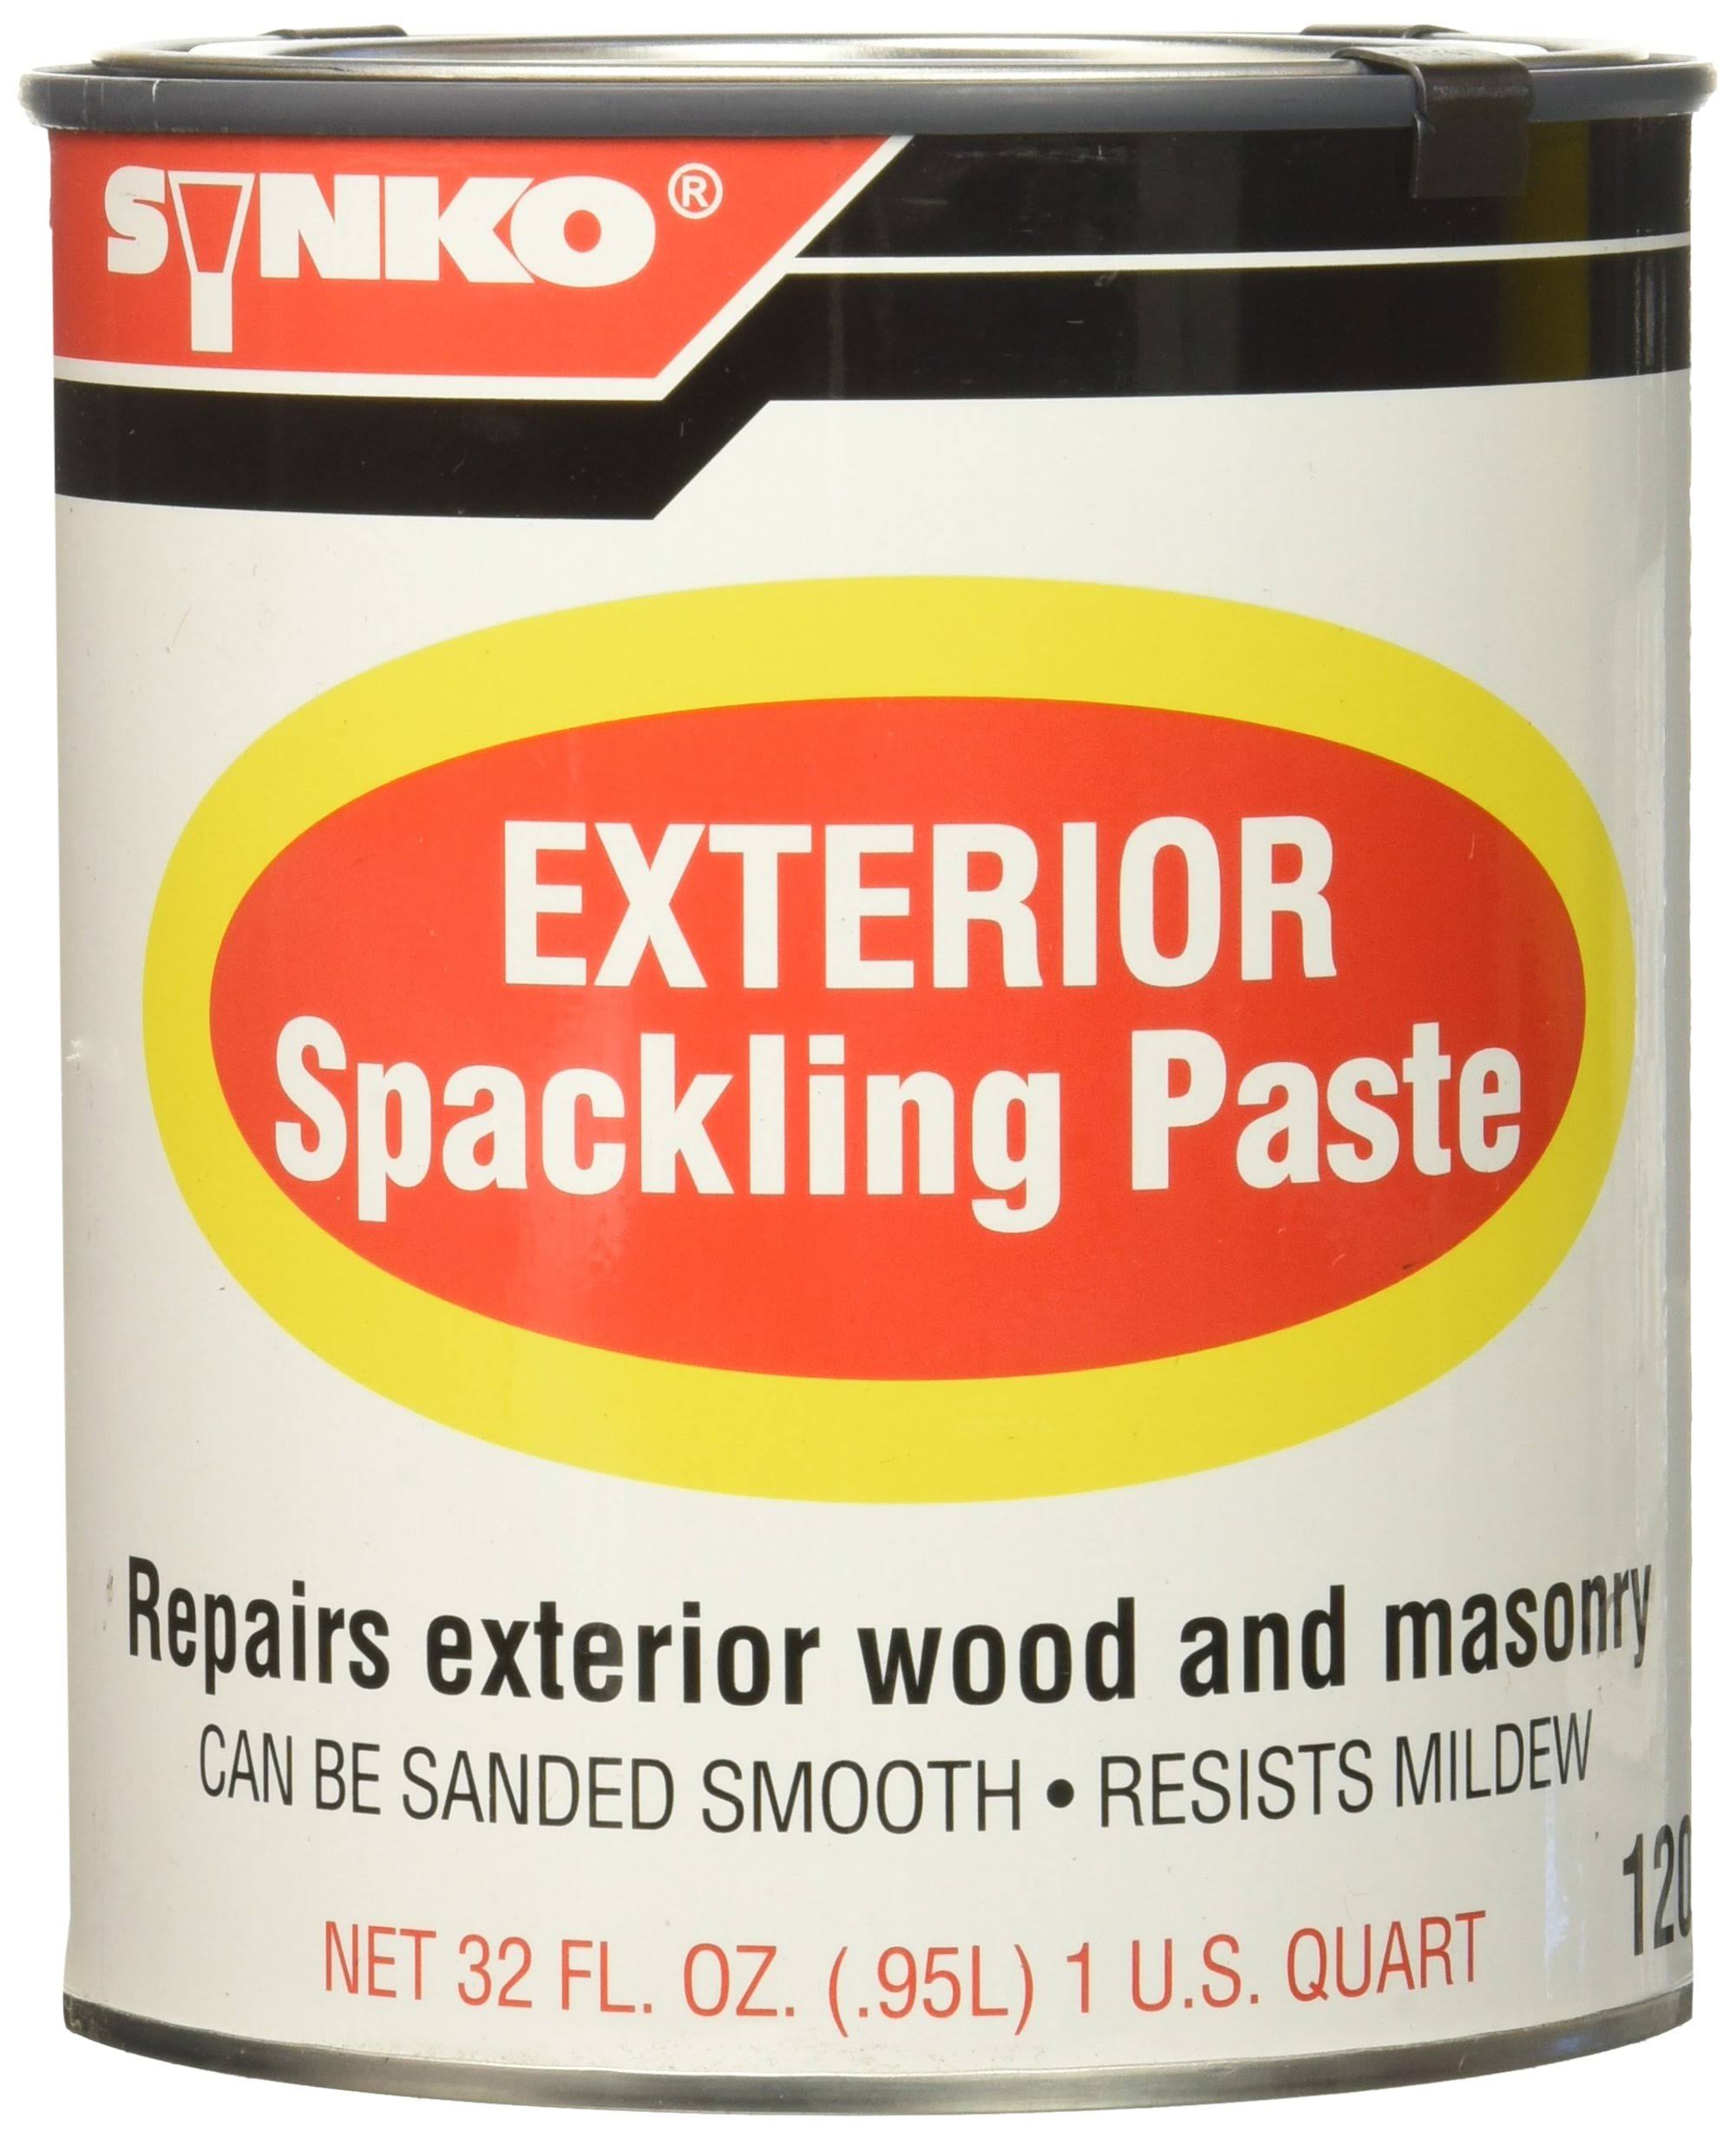 Synkoloid Exterior Spackling Paste QT | Garage | Delivery Guaranteed | Free Shipping On All Orders | Best Price Guarantee